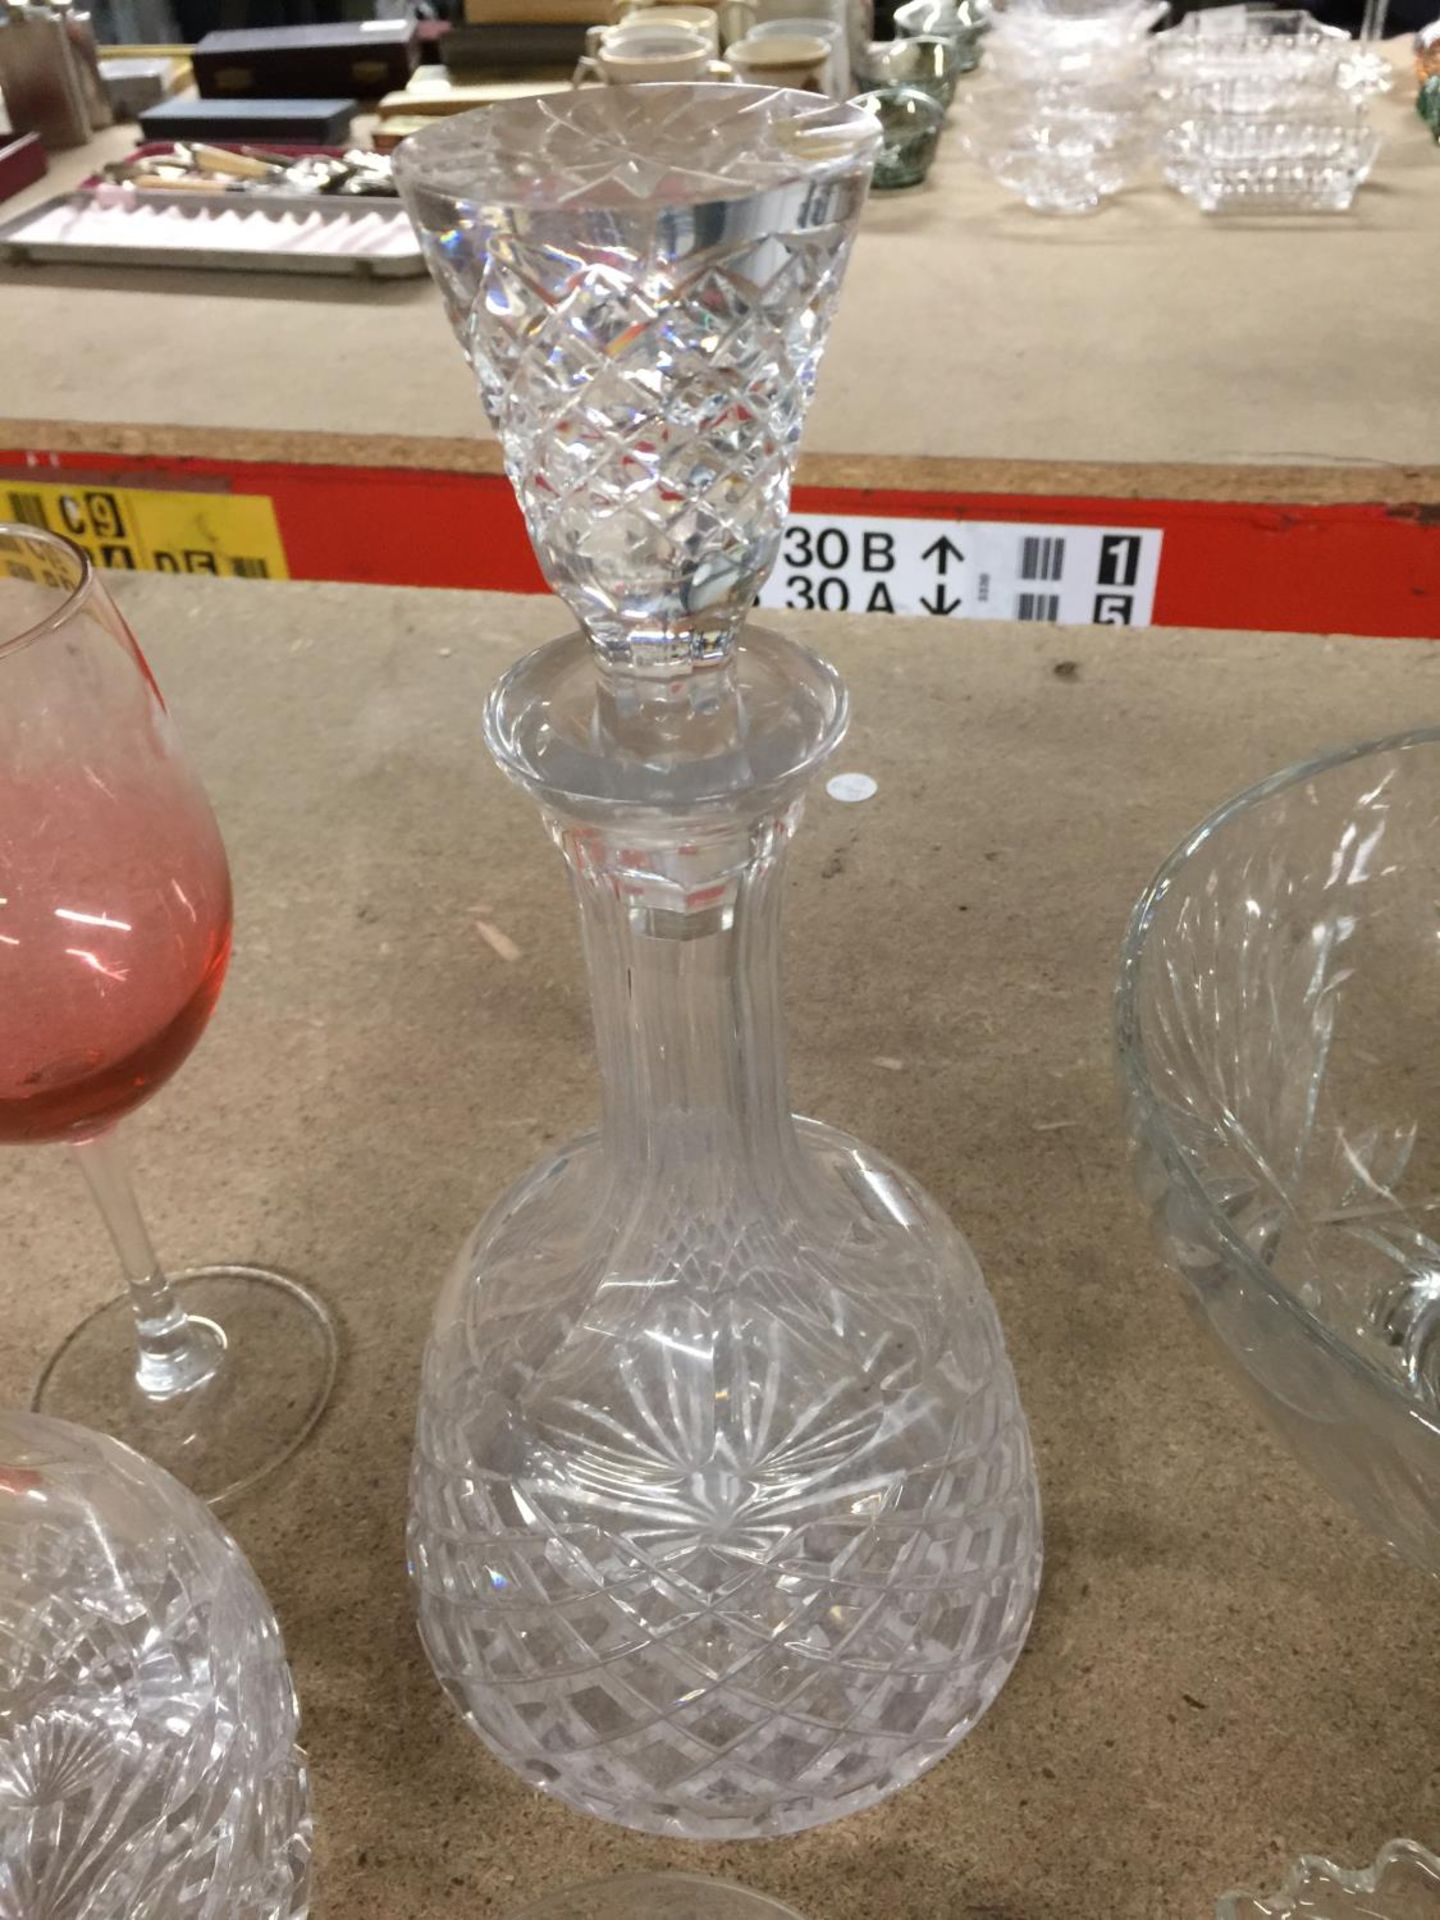 AN ASSORTMENT OF GLASSWARE TO INCLUDE DECANTERS, BOWLS, VASES, GLASSES, ETC - Image 7 of 7